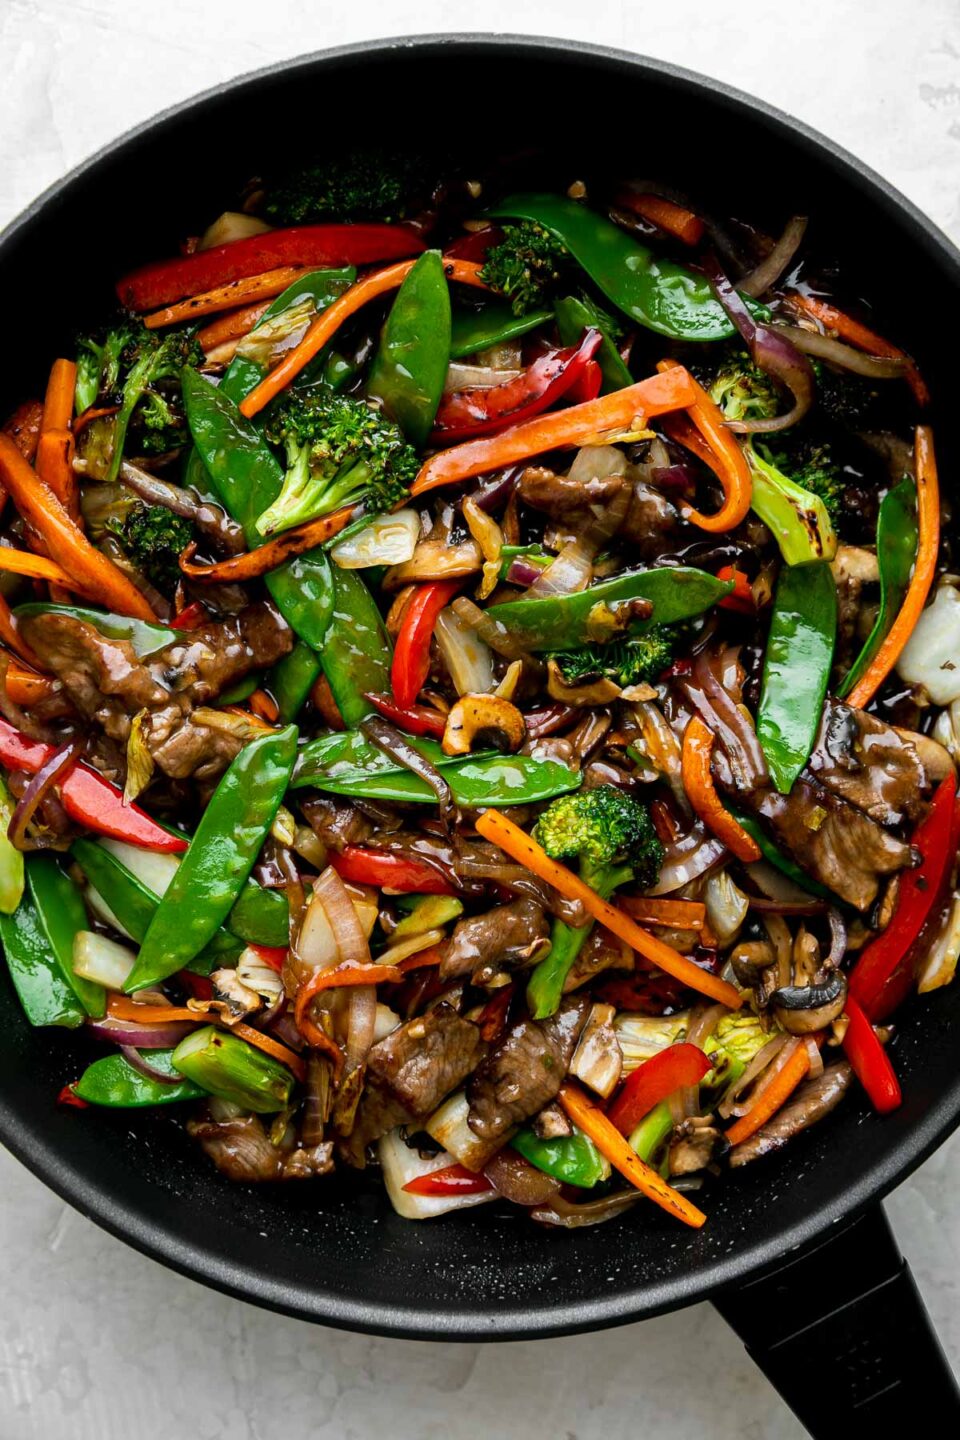 How to make beef and vegetable stir fry, step 4: Sear the beef & finish the stir fry. Finished beef vegetable stir fry fills a black Zwilling Madura Nonstick Skillet. The beef and vegetables are glossy with a coating of homemade stir fry sauce. The skillet sits atop a creamy white textured surface.